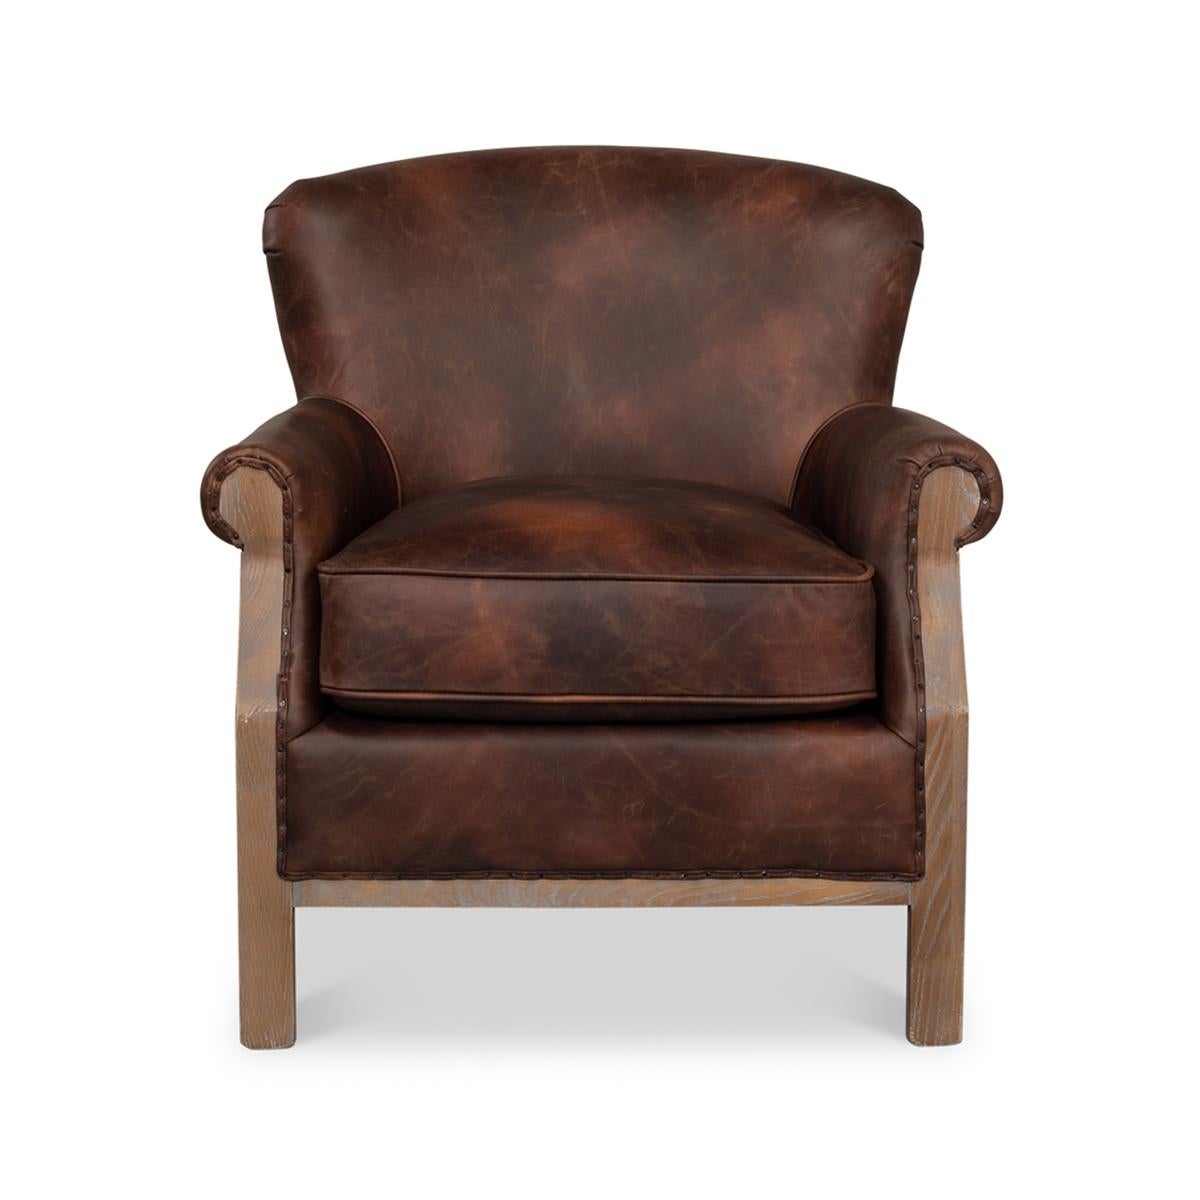 Deconstructed Classic club chair, perfectly scaled for comfort and conversation with it